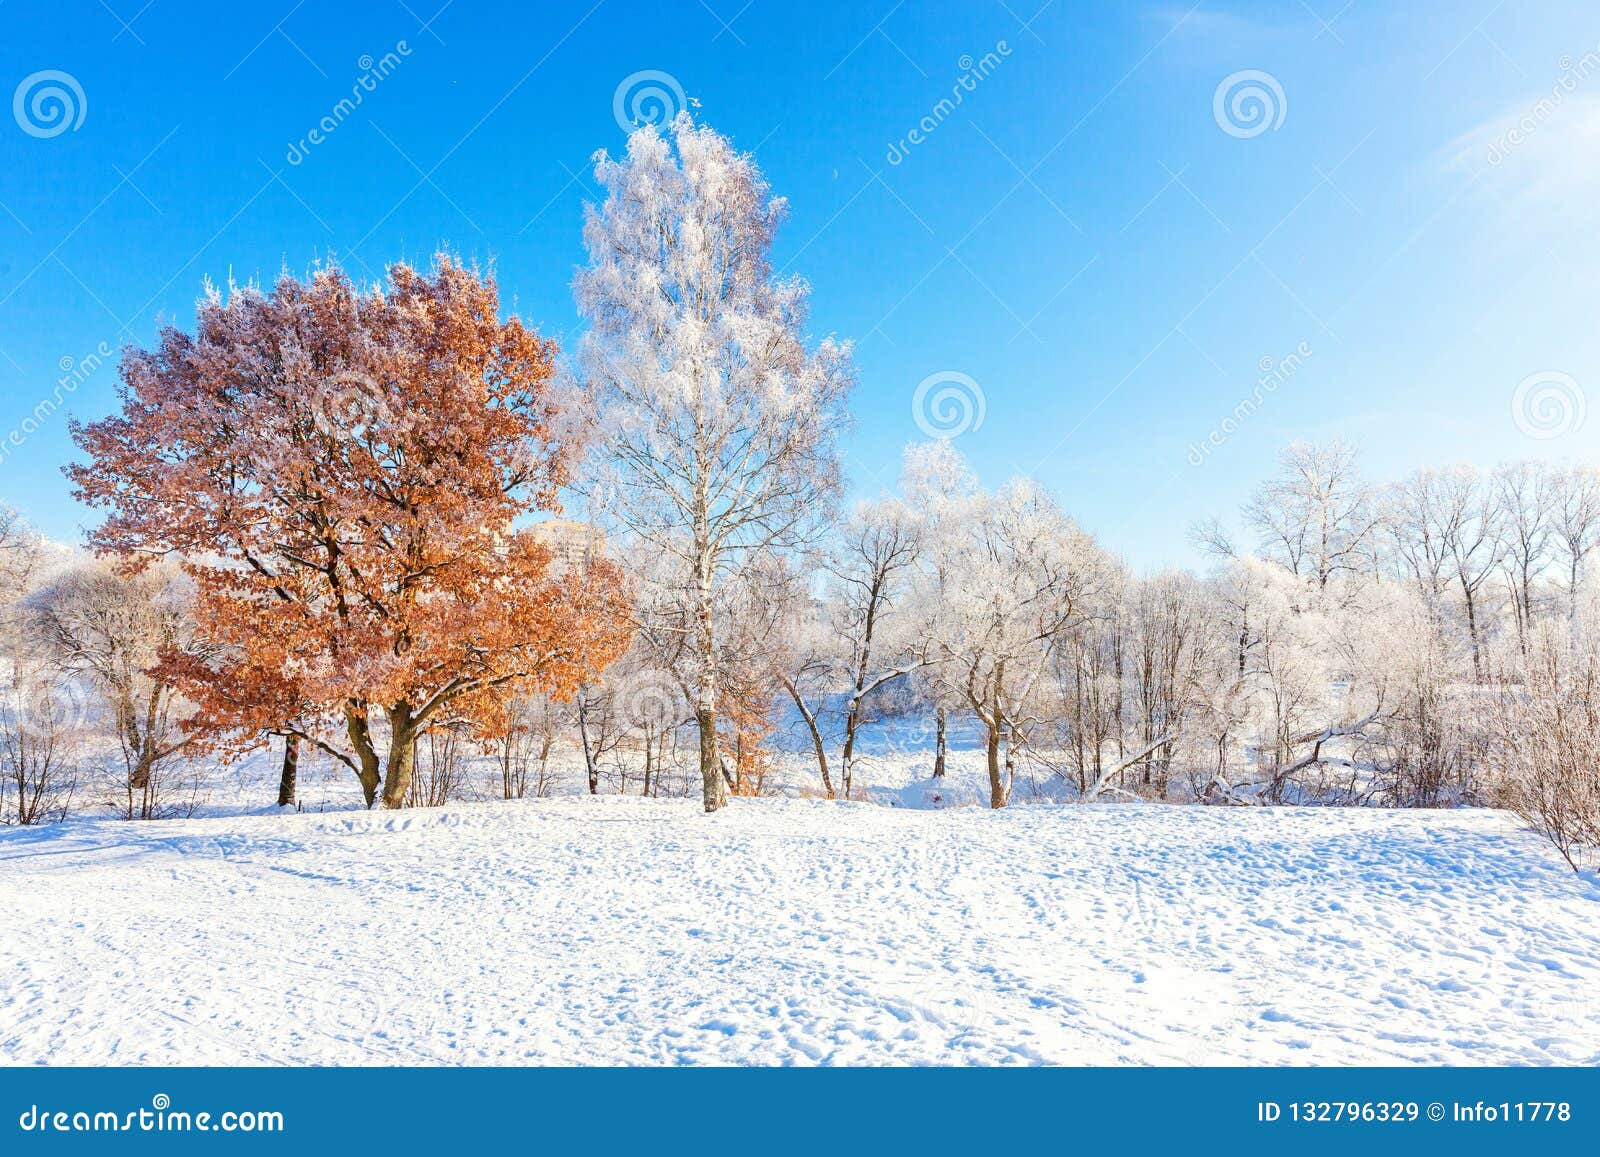 Frosty Trees In Snowy Forest Cold Weather In Sunny Morning Stock